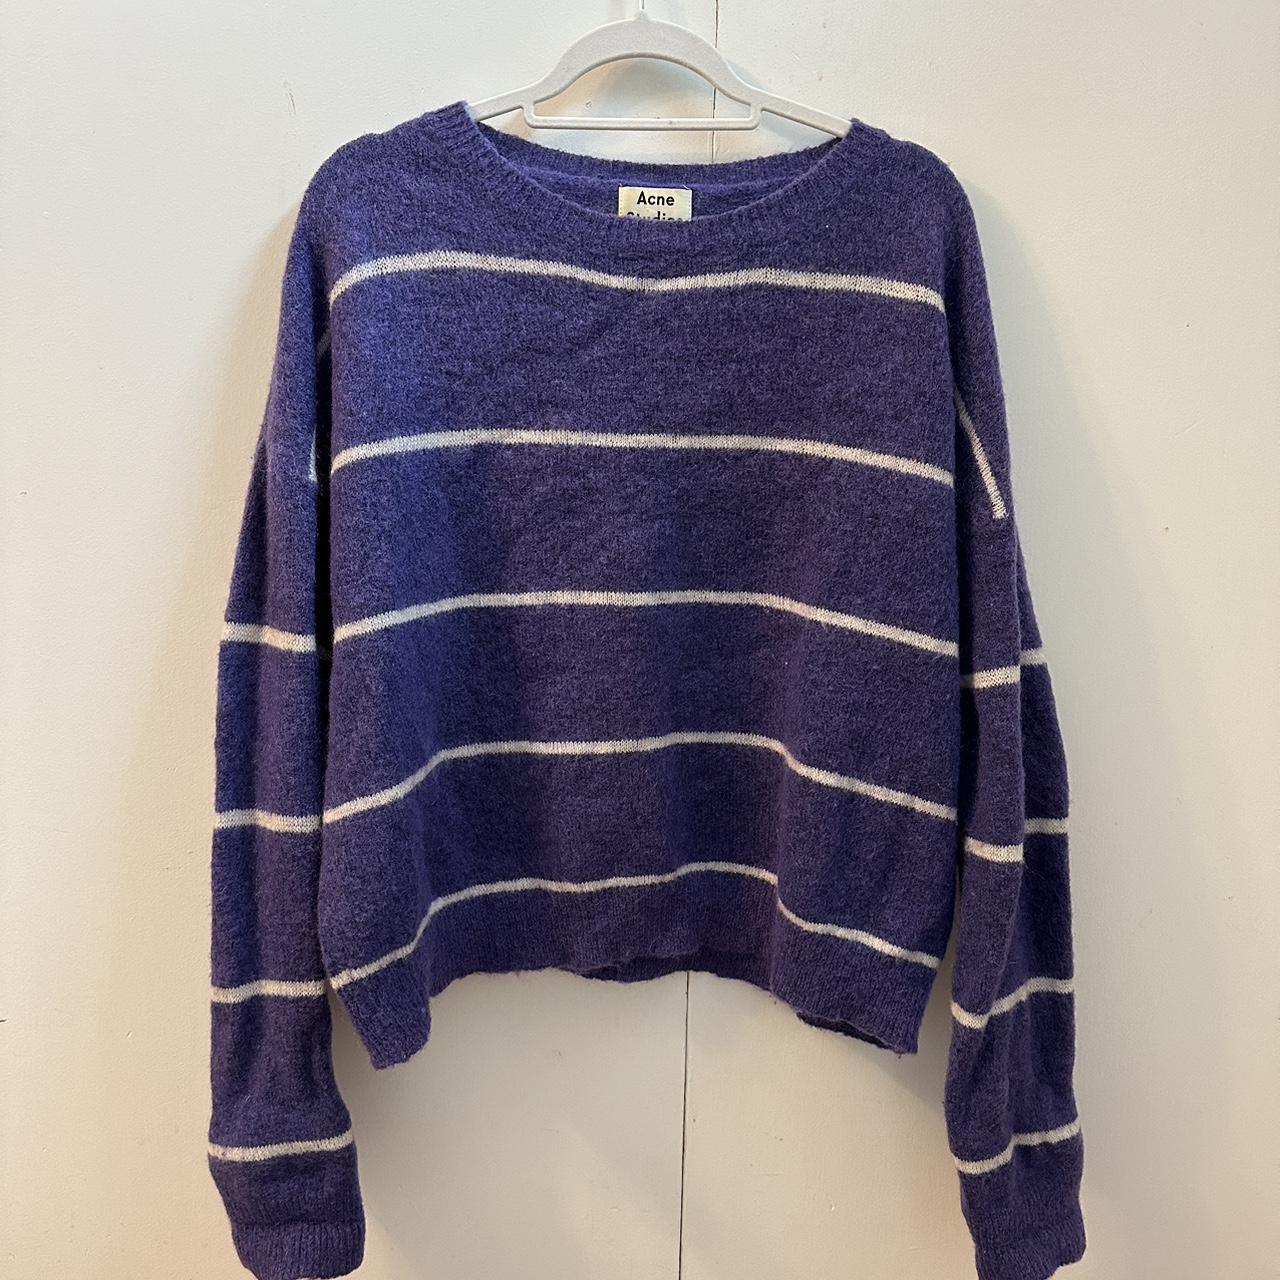 Acne mohair sweater in great condition! Not super... - Depop